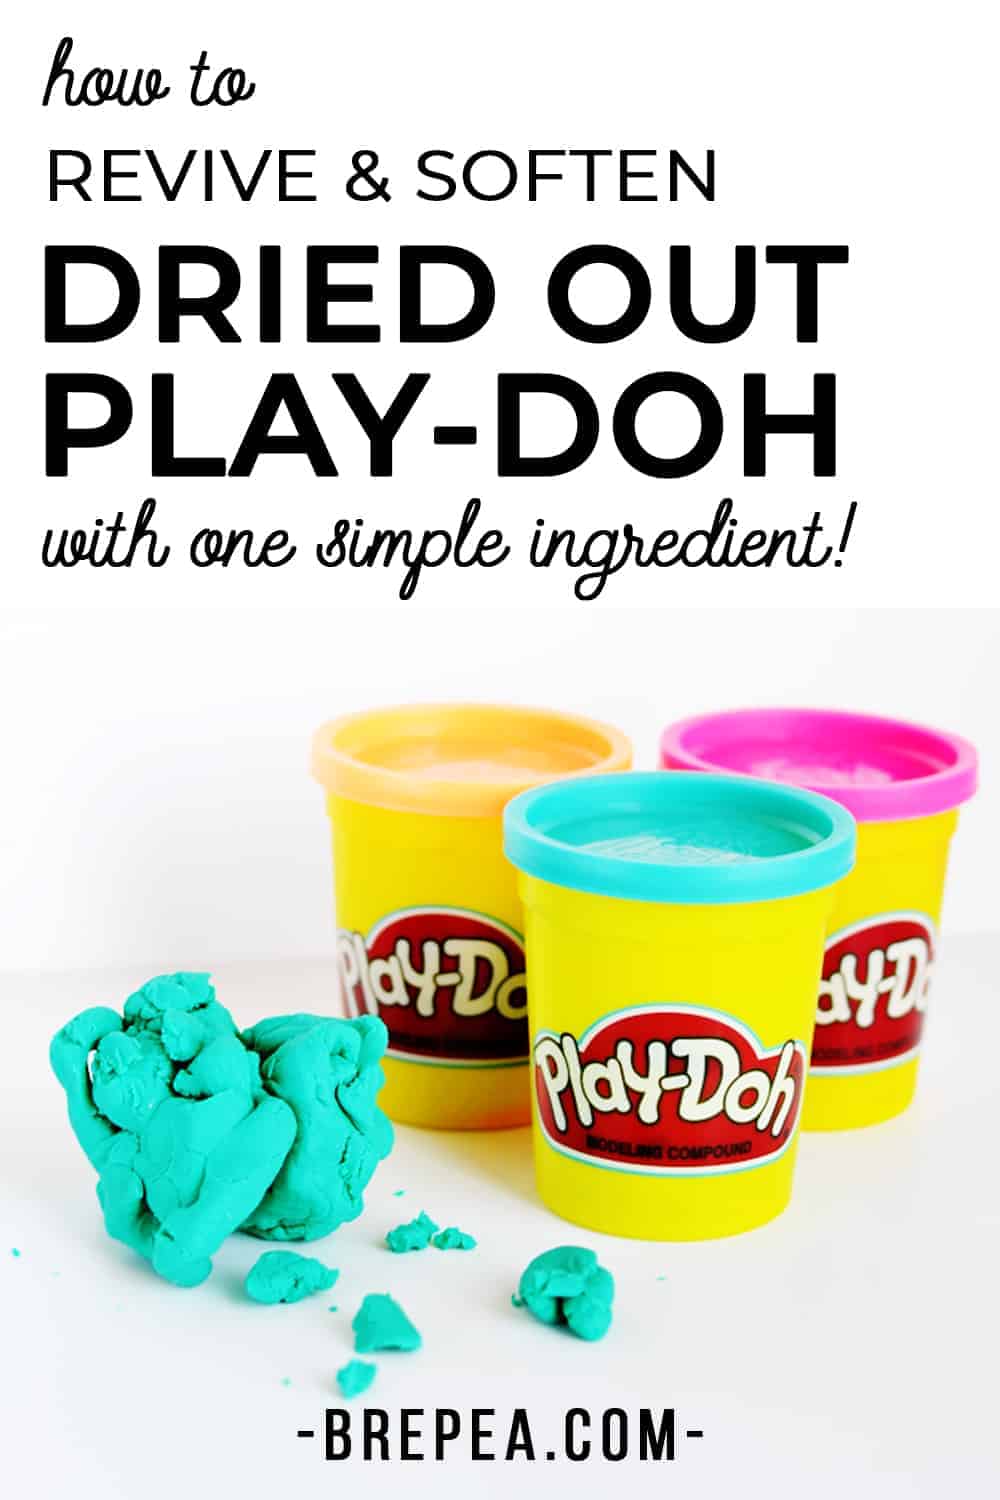 Soften Dried Out Play-Doh